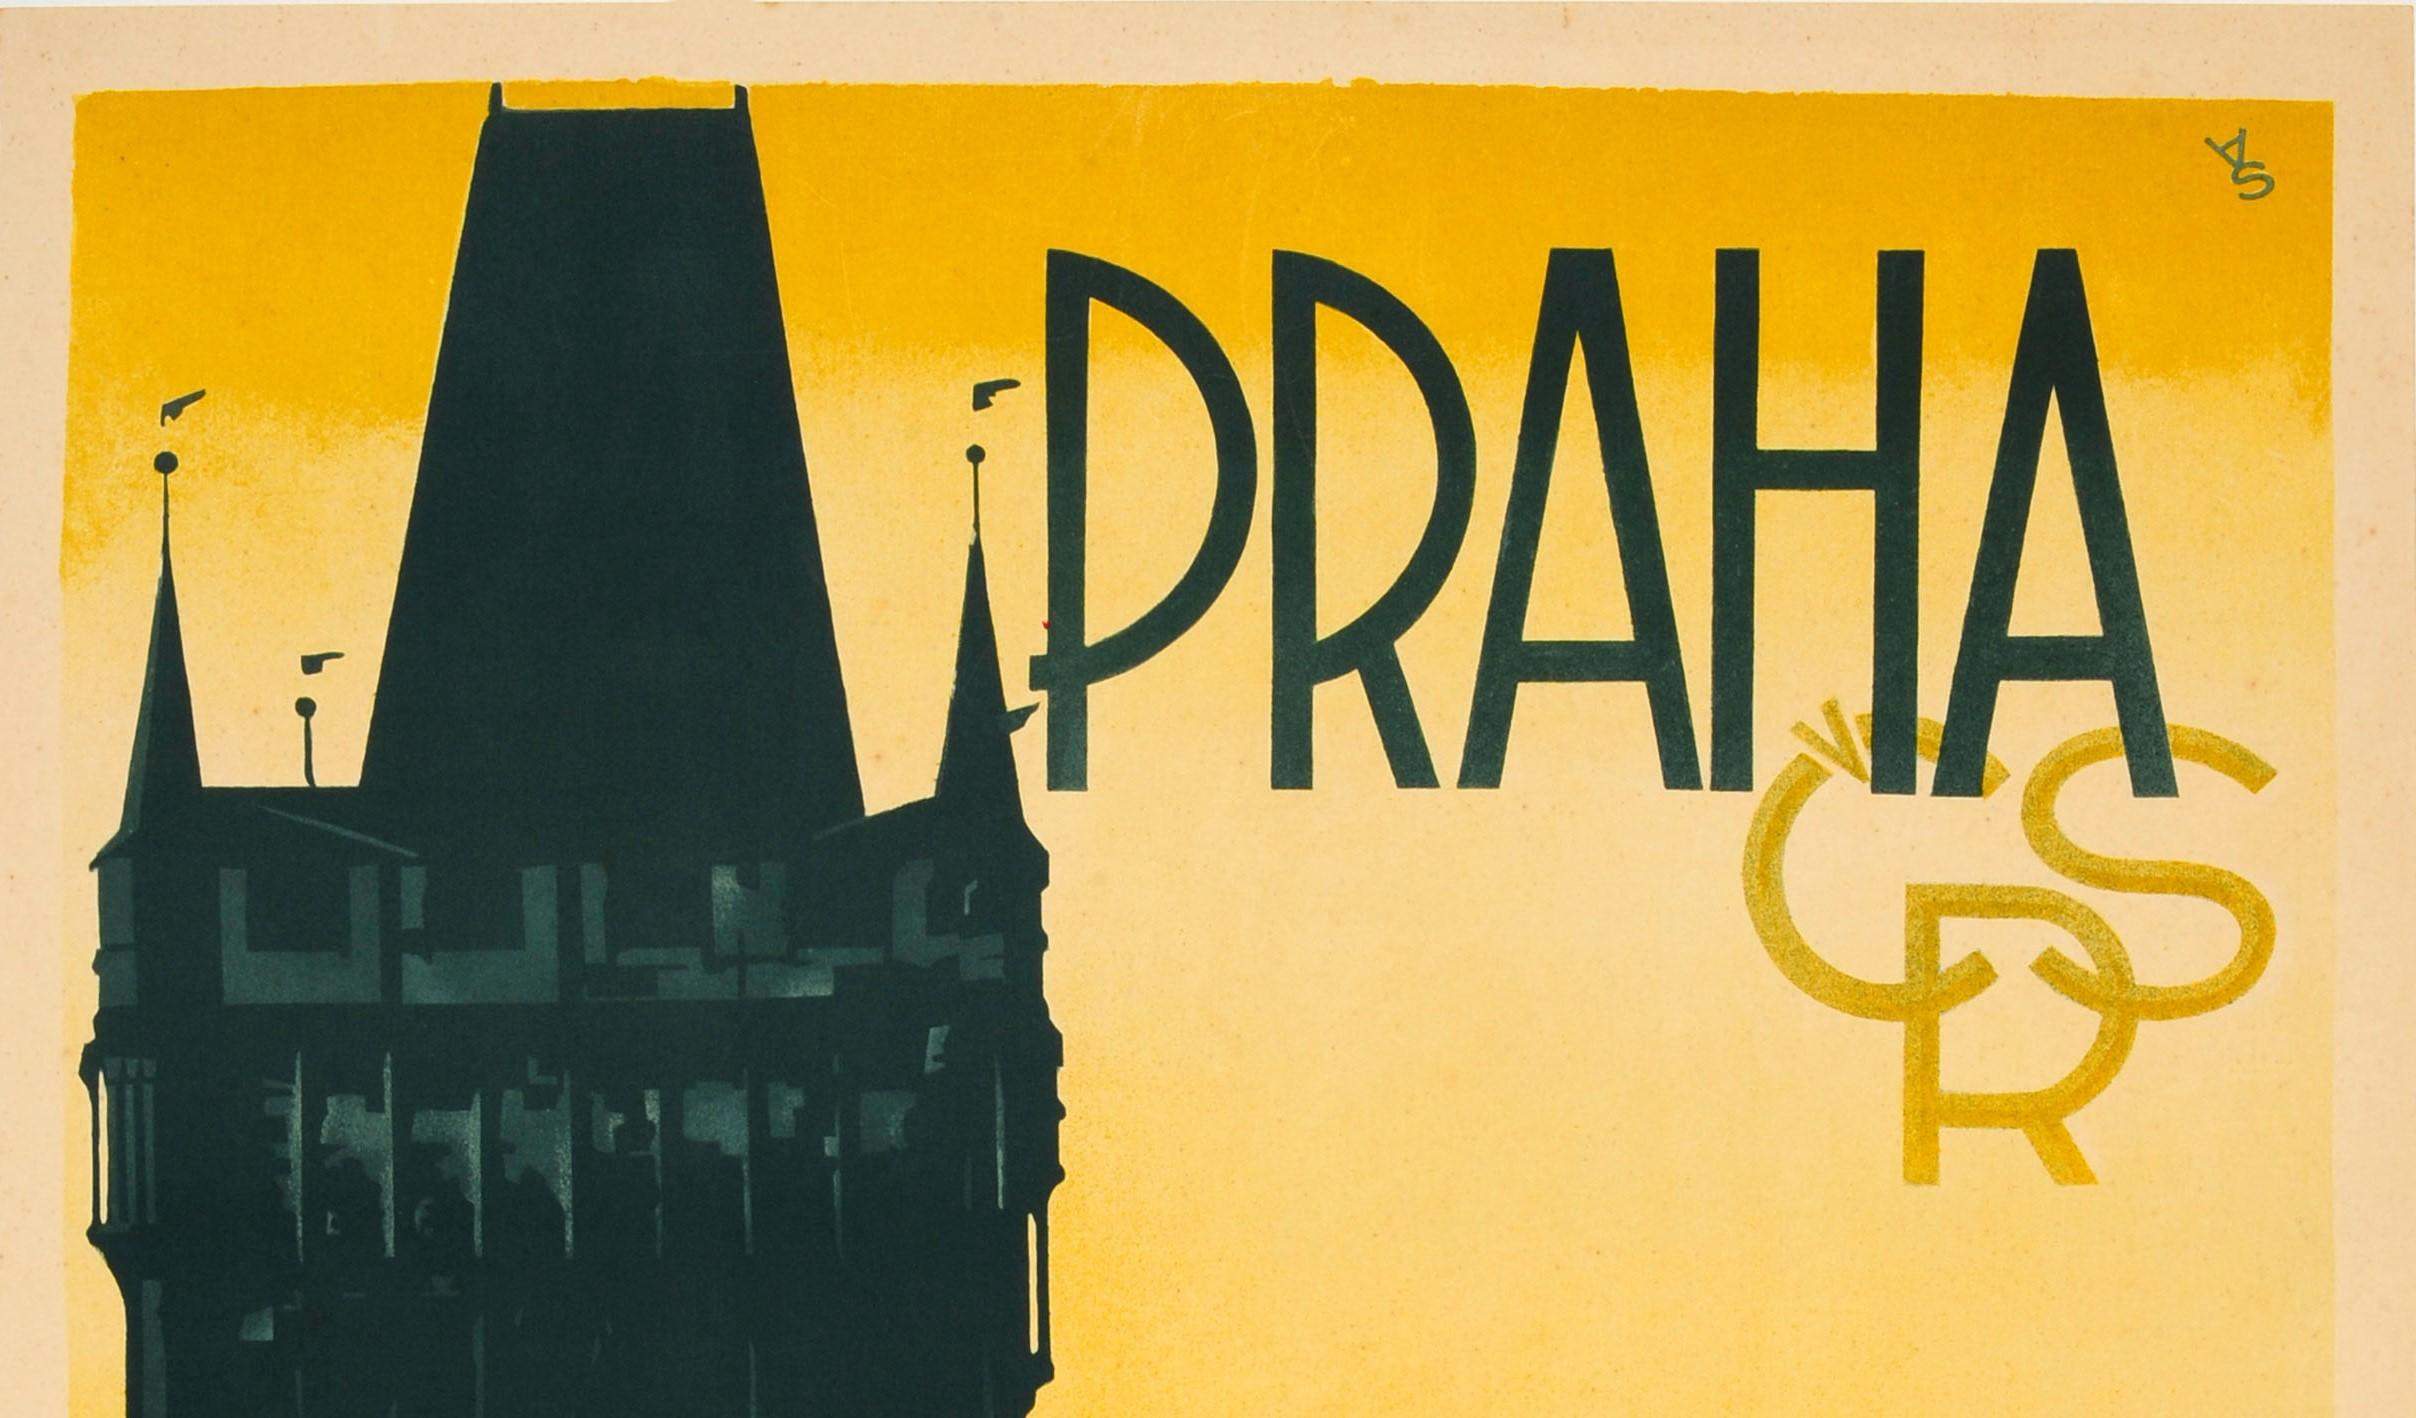 Original vintage travel poster advertising Praha / Prague (the capital and largest city in the Czech Republic previously Czechoslovakia and the historical capital of Bohemia, located on the Vltava river). Stunning Art Deco style design featuring a